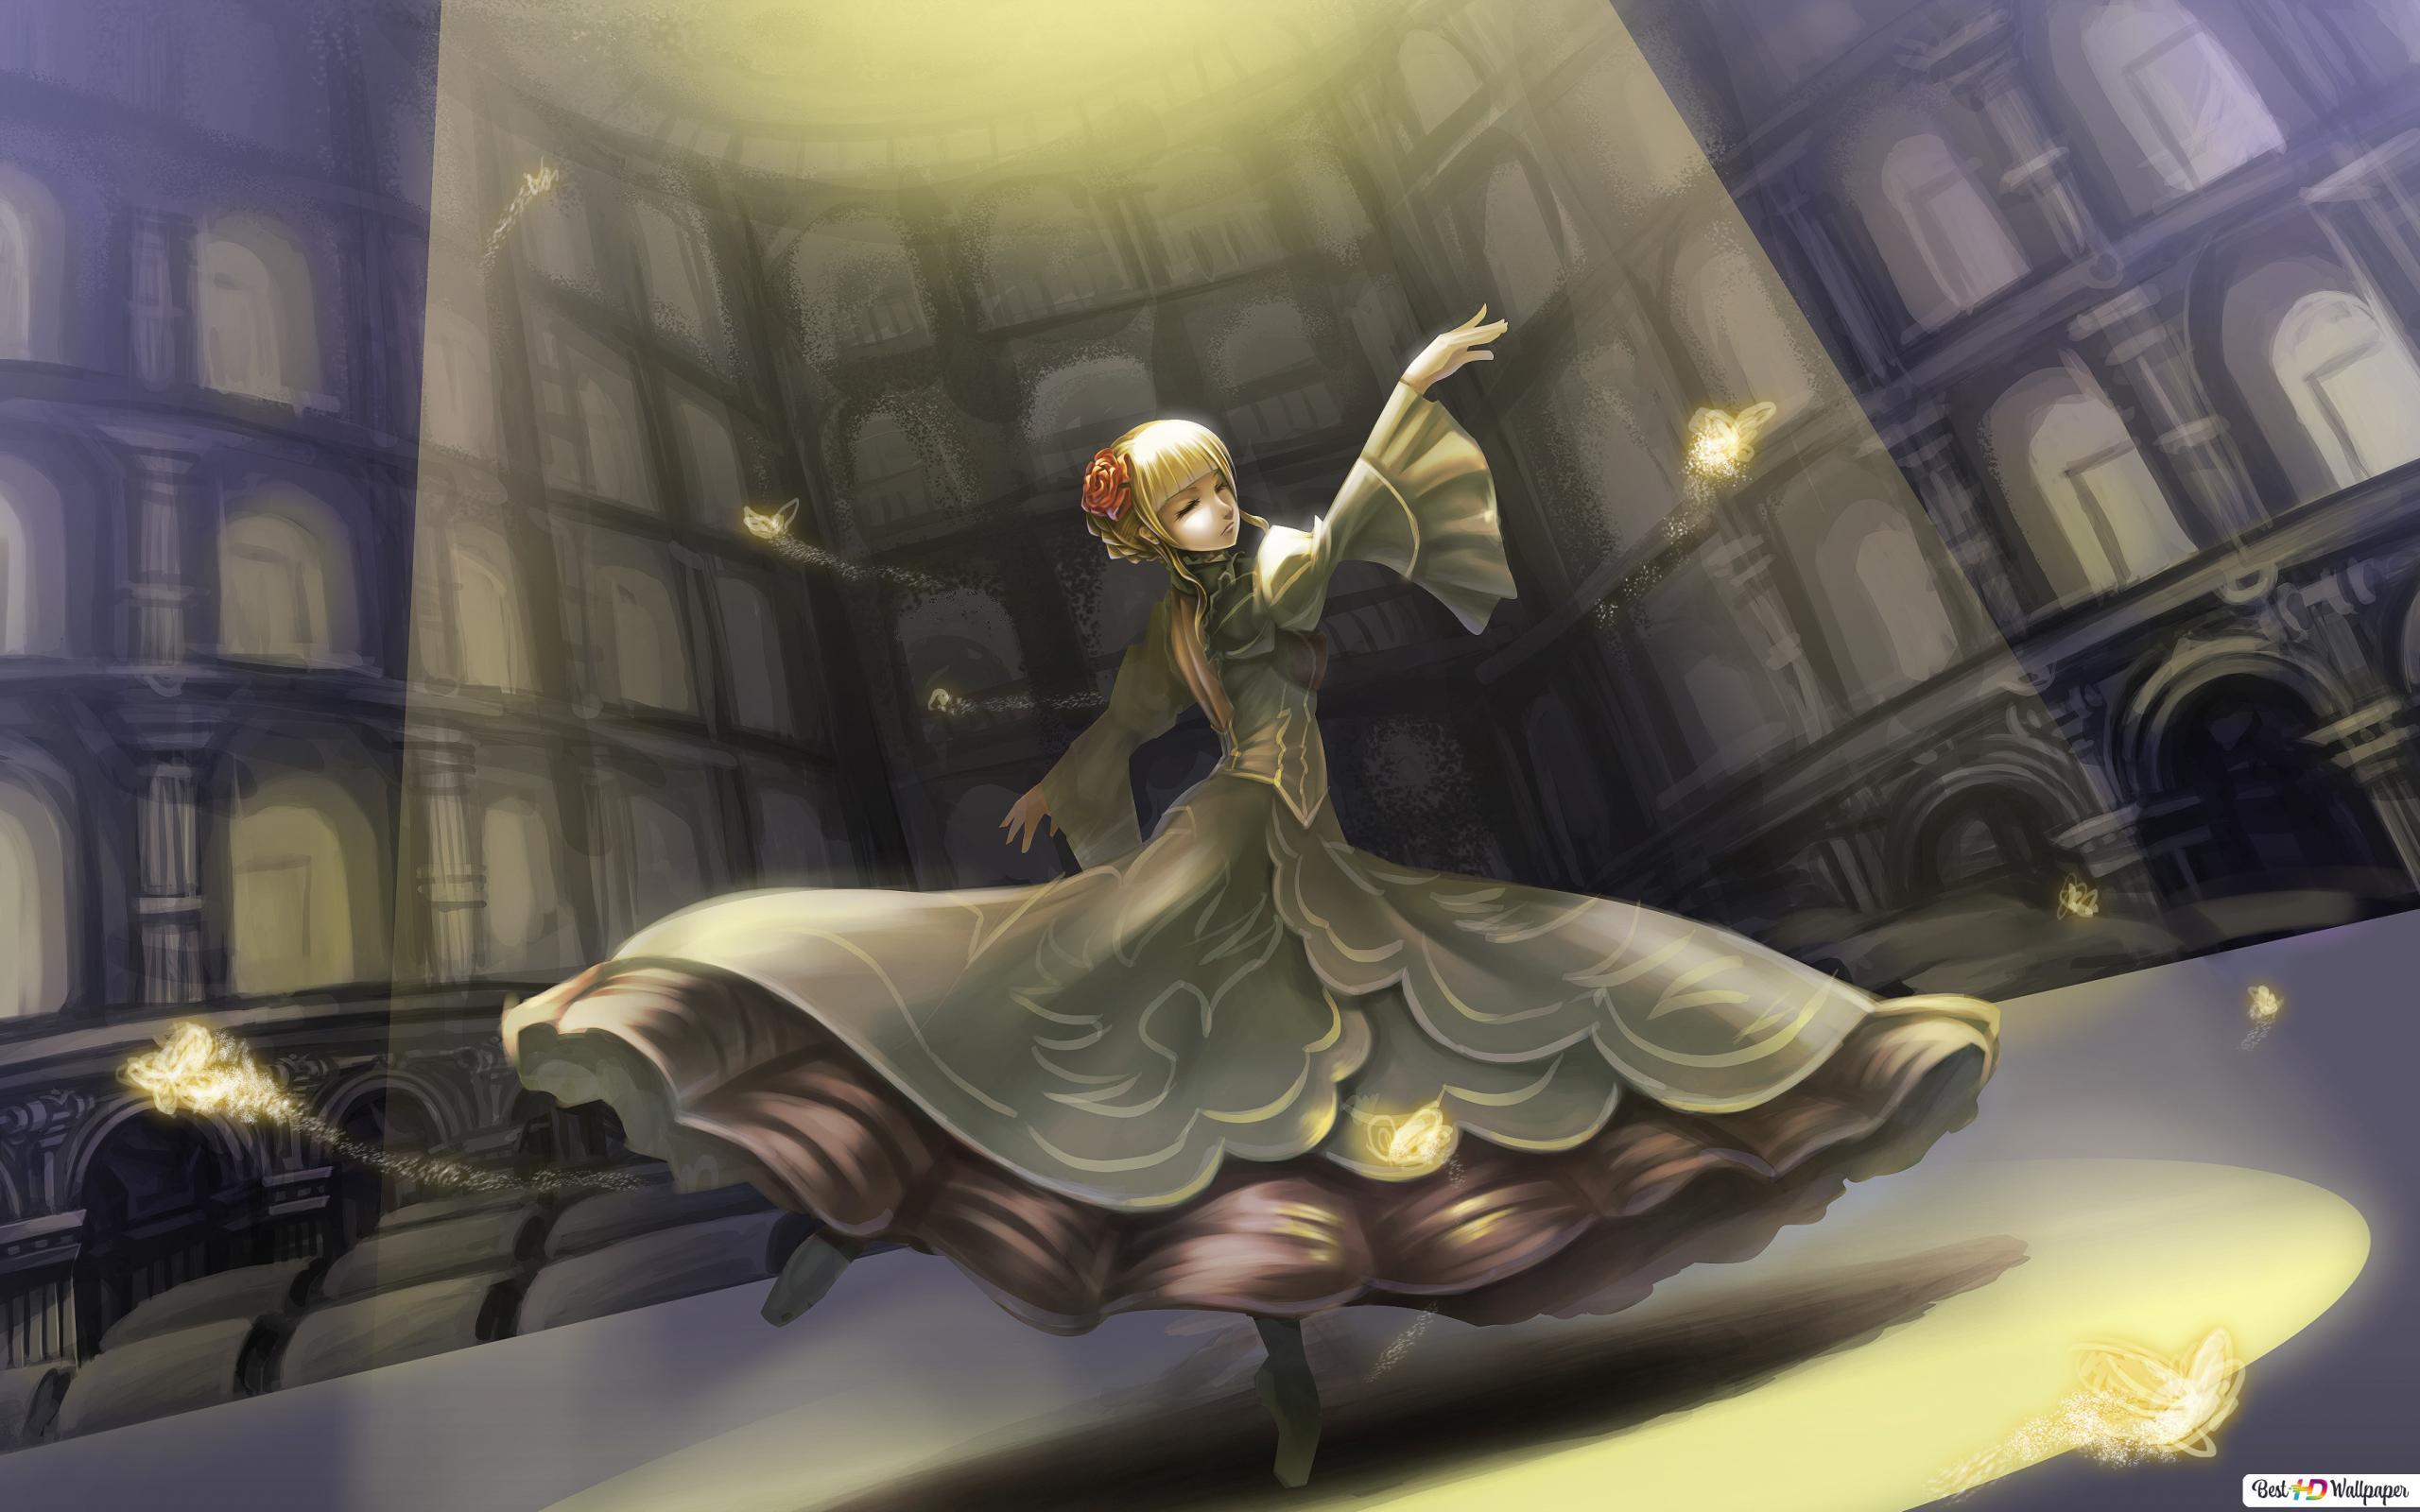 Umineko: When They Cry Wallpapers